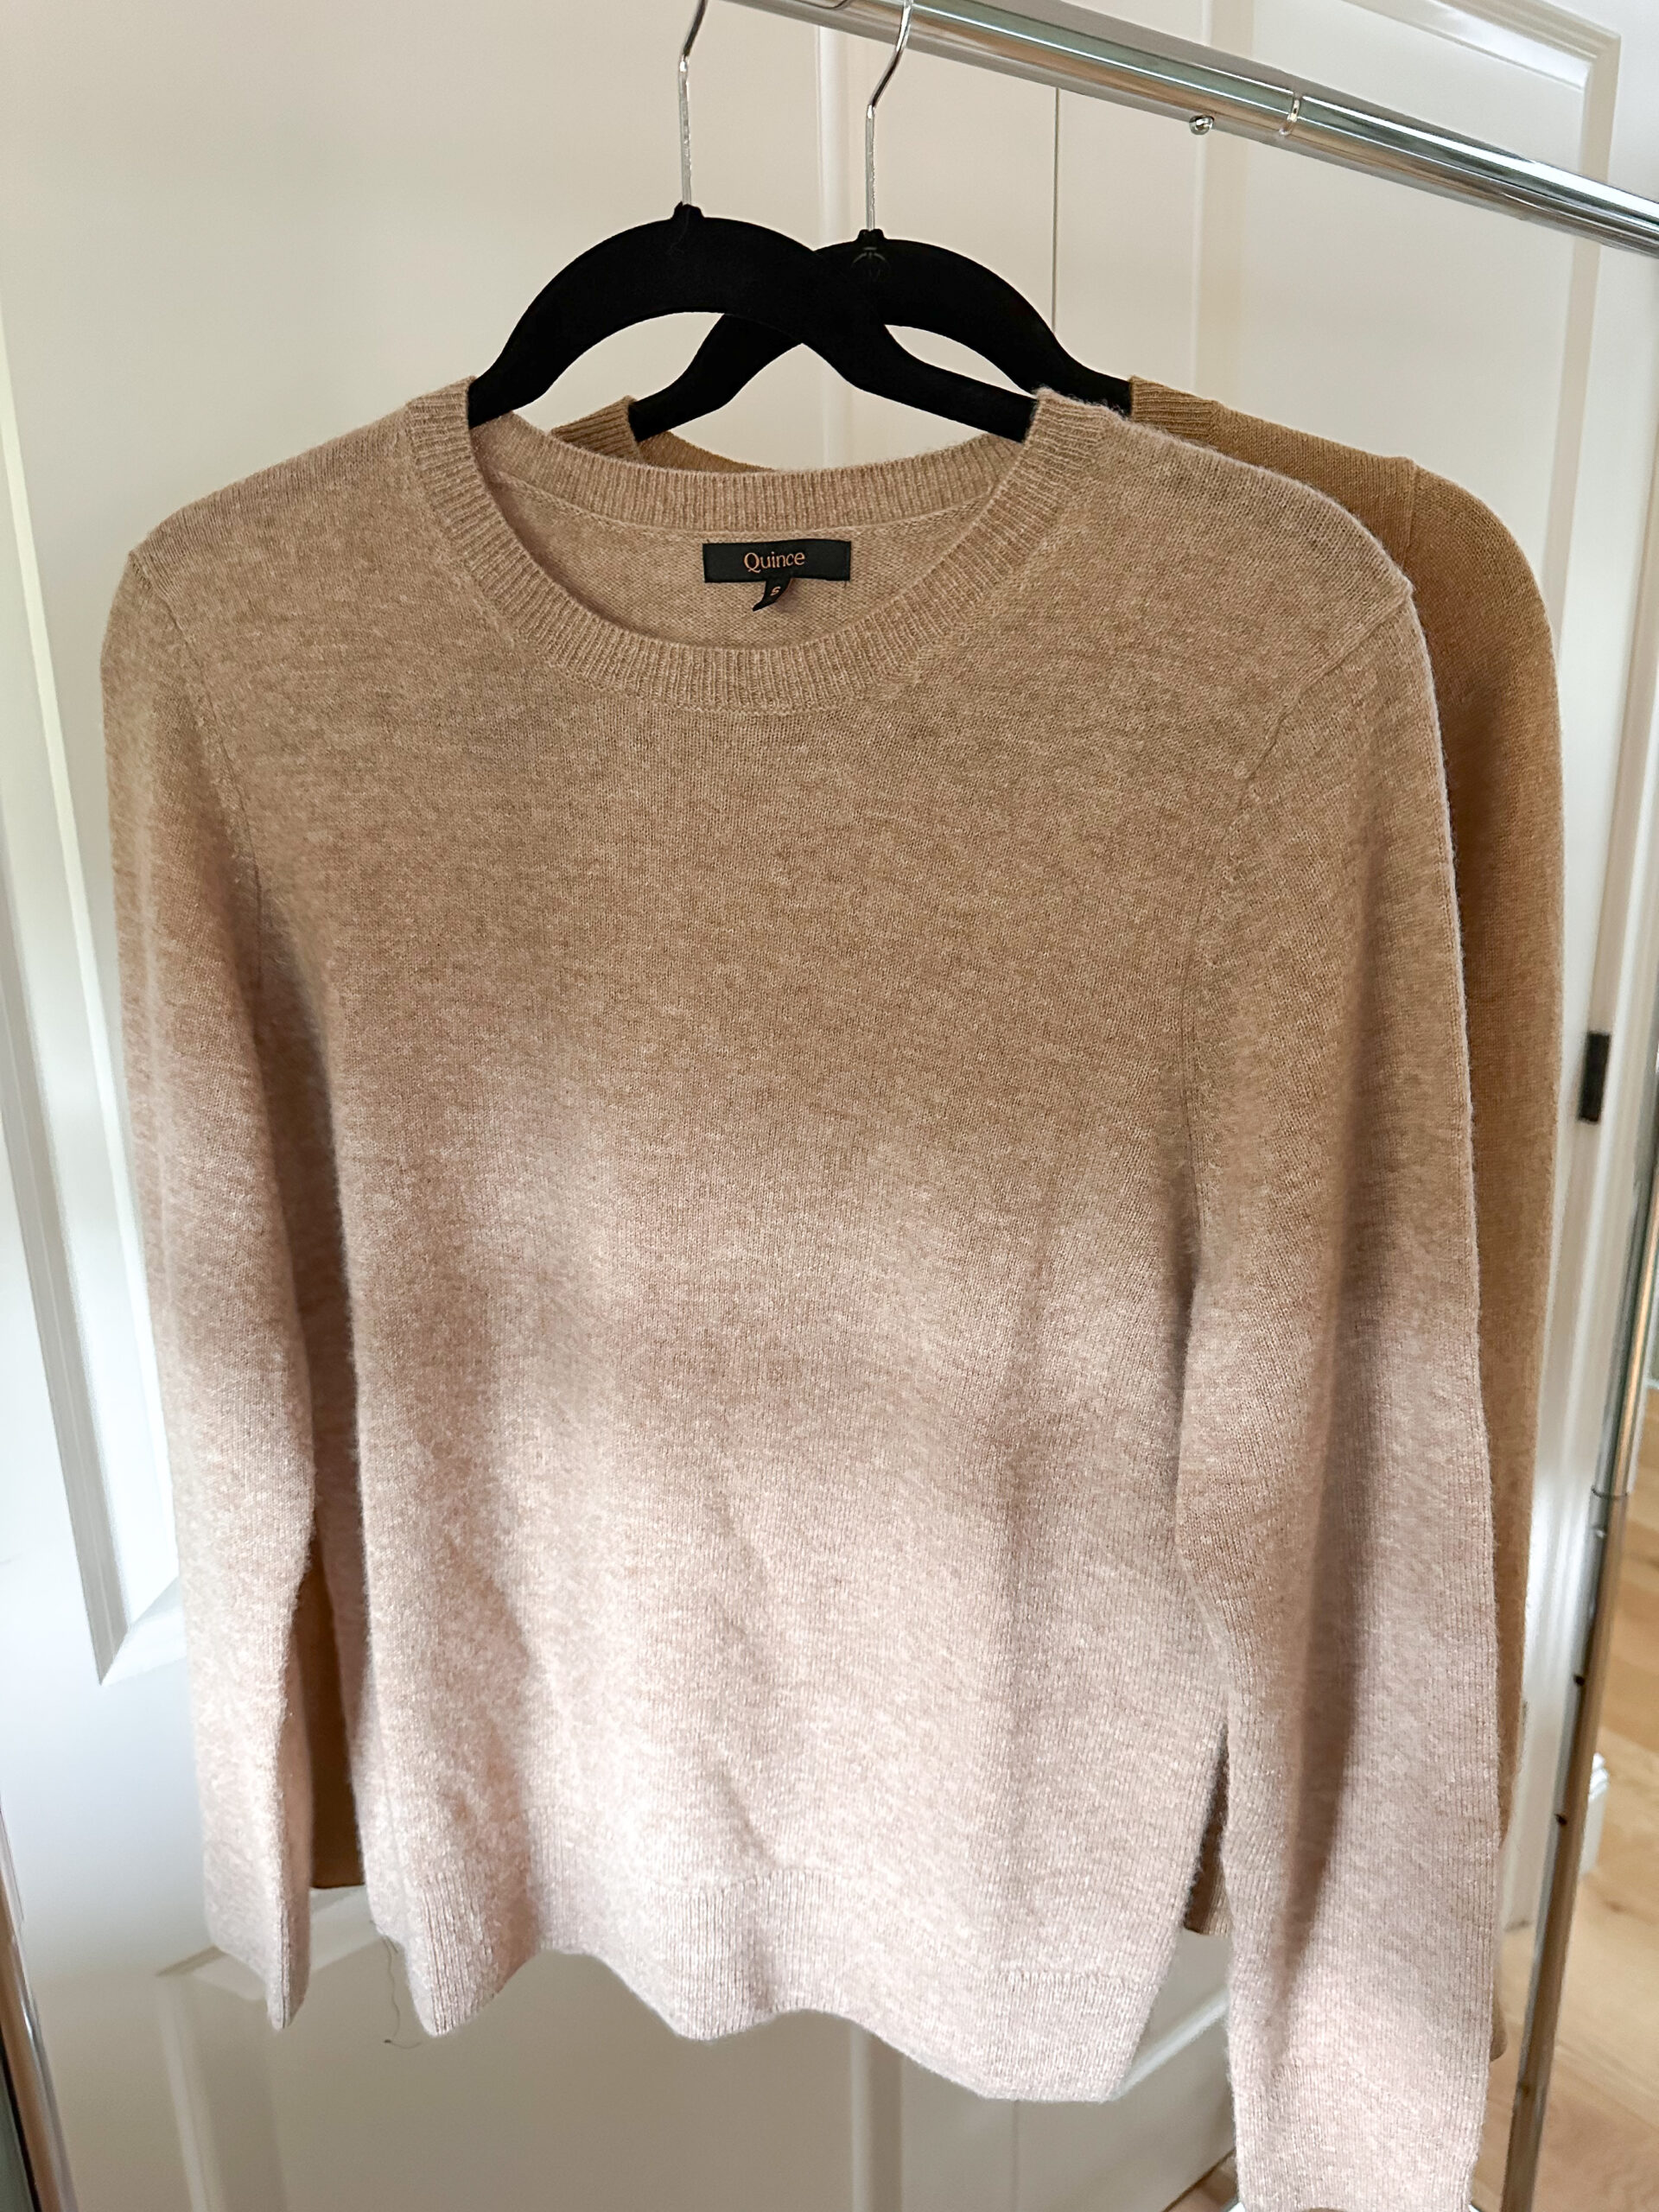 Two cashmere sweaters hanging on rack.